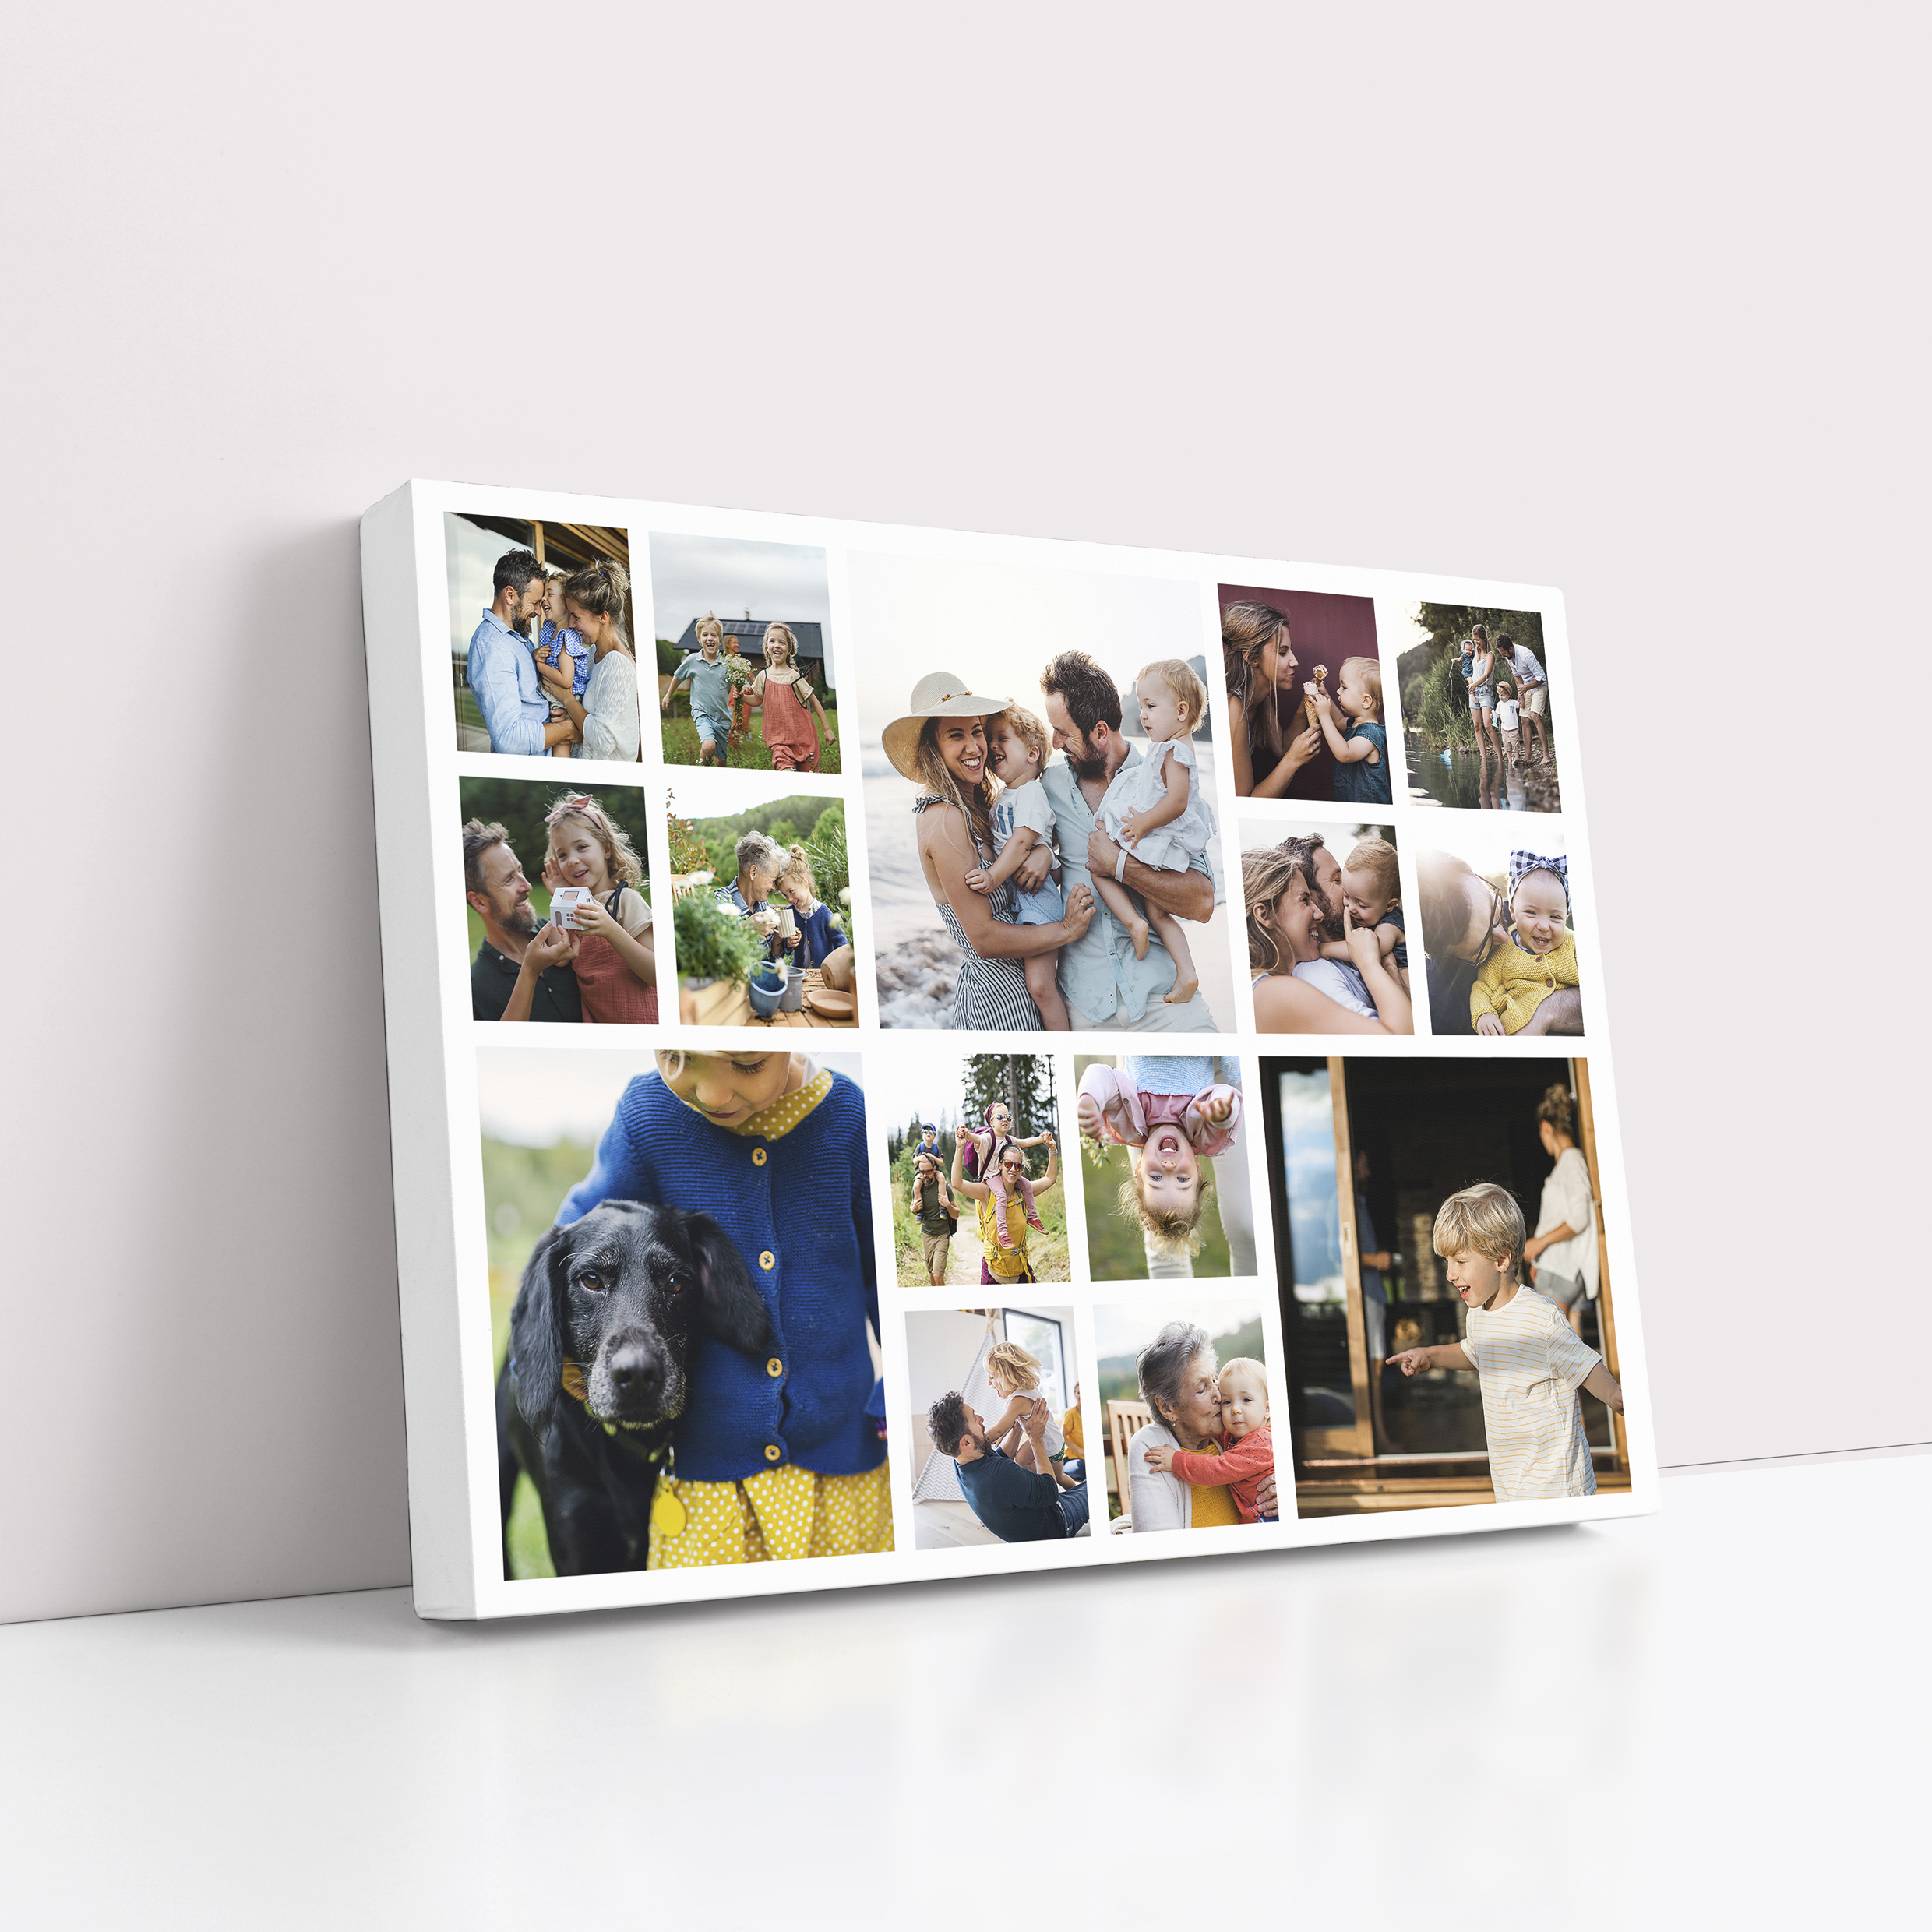  Personalized Memories Overload Stretch Canvas Print - Customizable with 10+ Cherished Photos